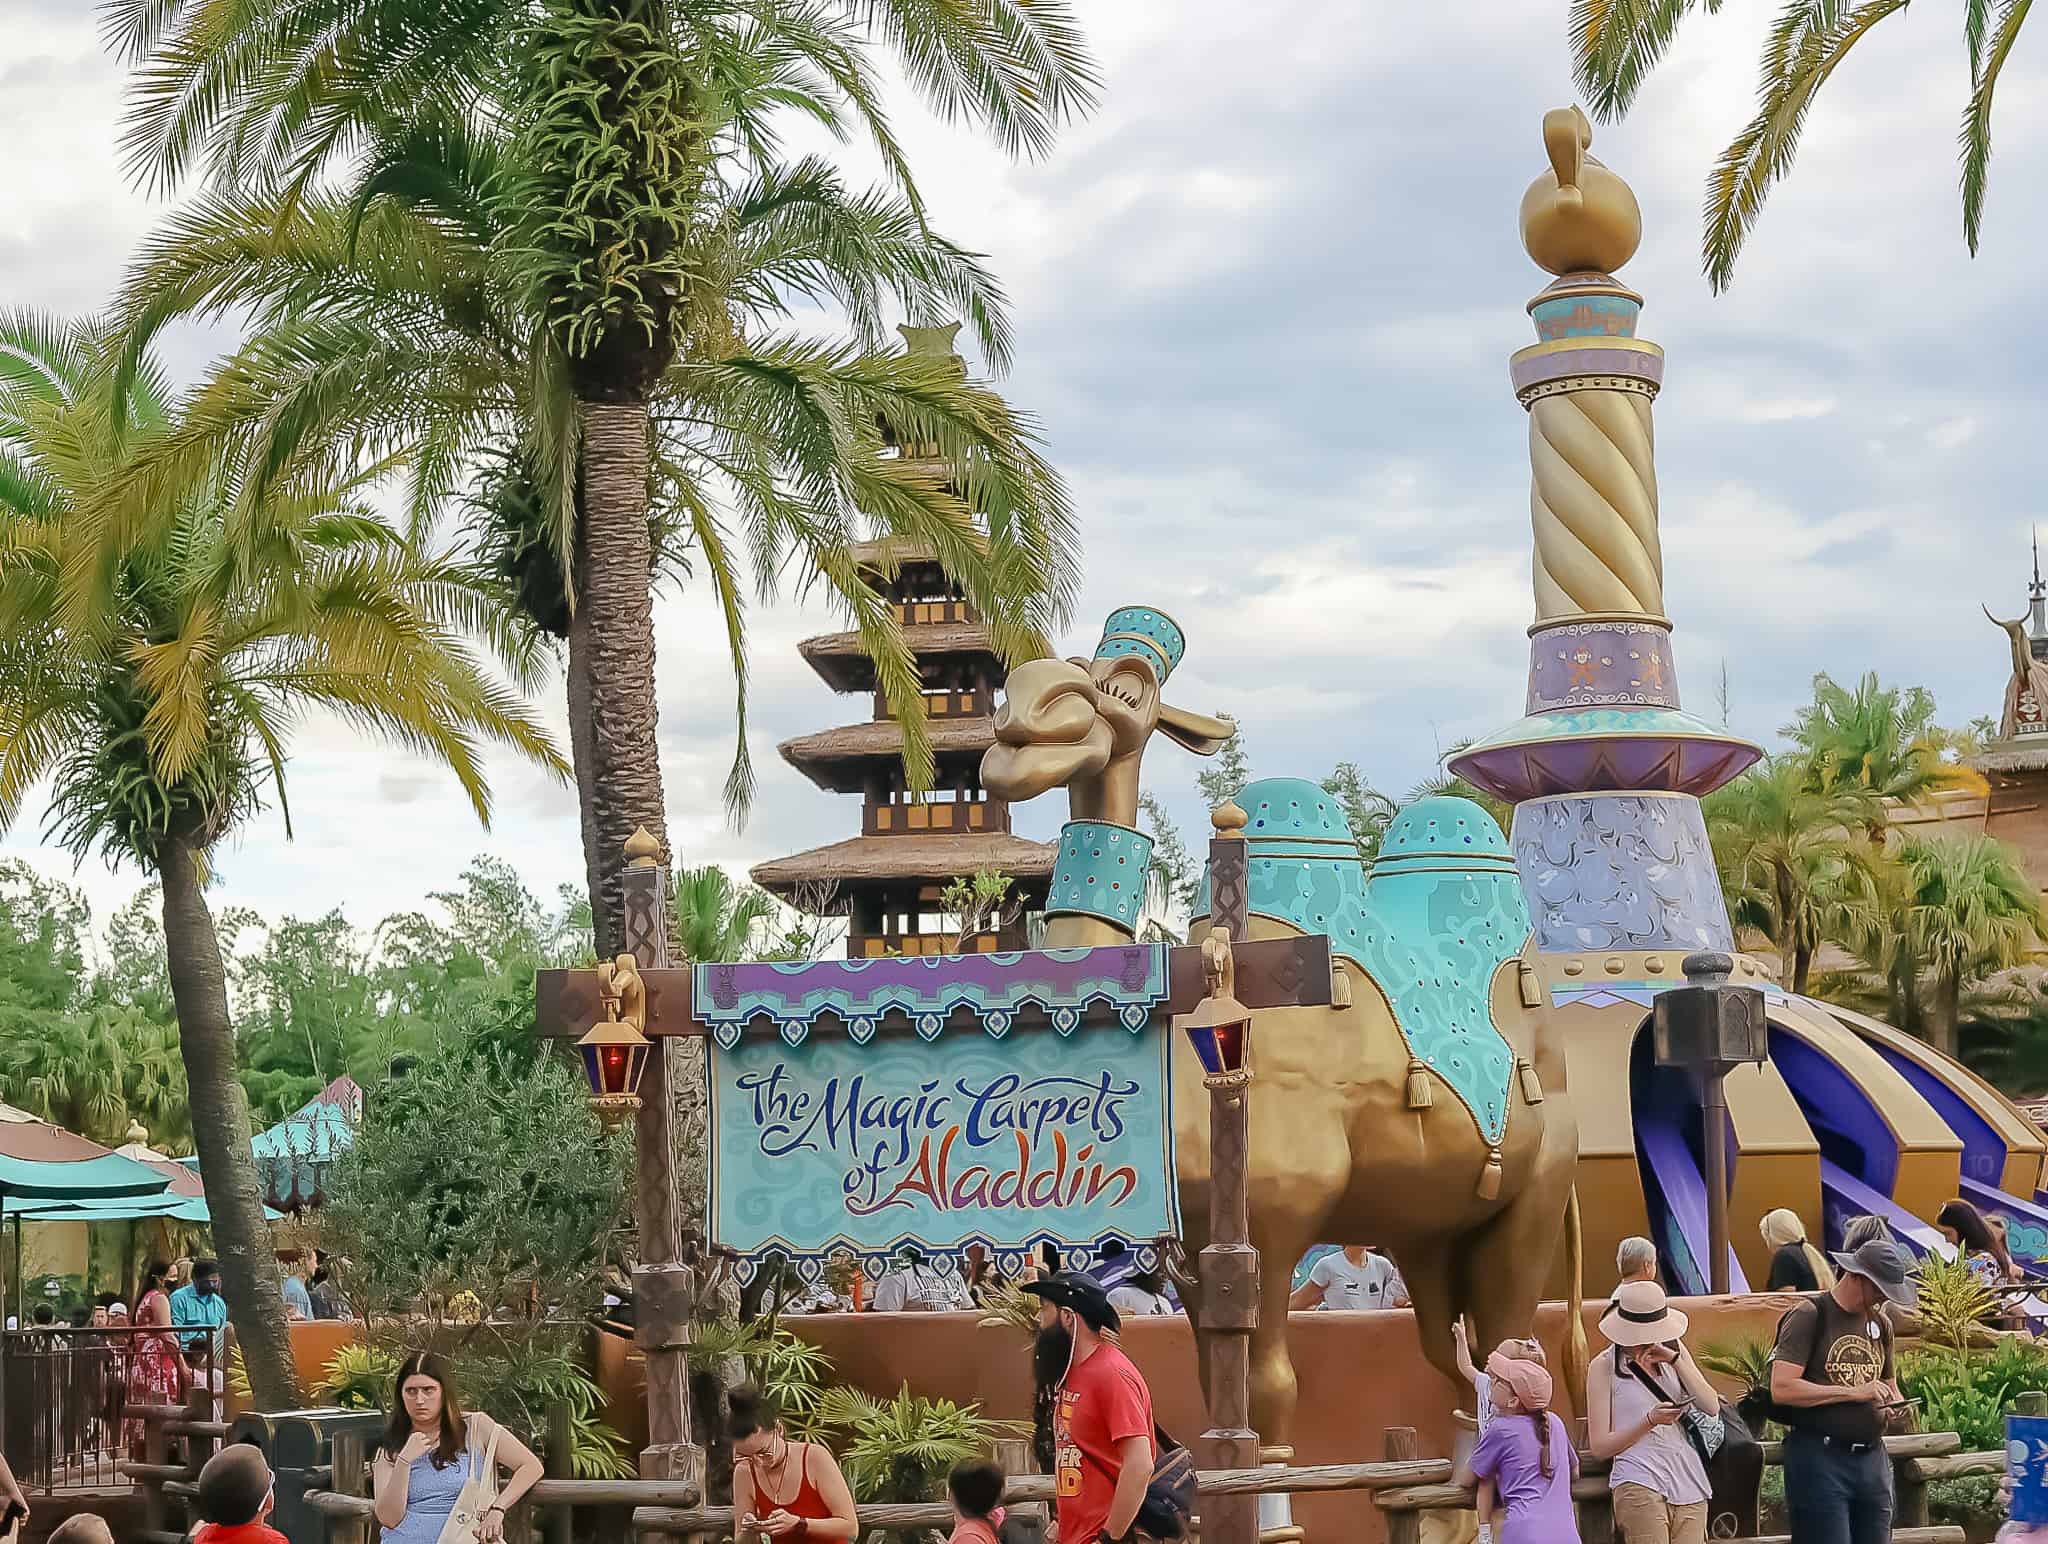 The Magic Carpets Of Aladdin Ride at Magic Kingdom (Everything You Need to Know)